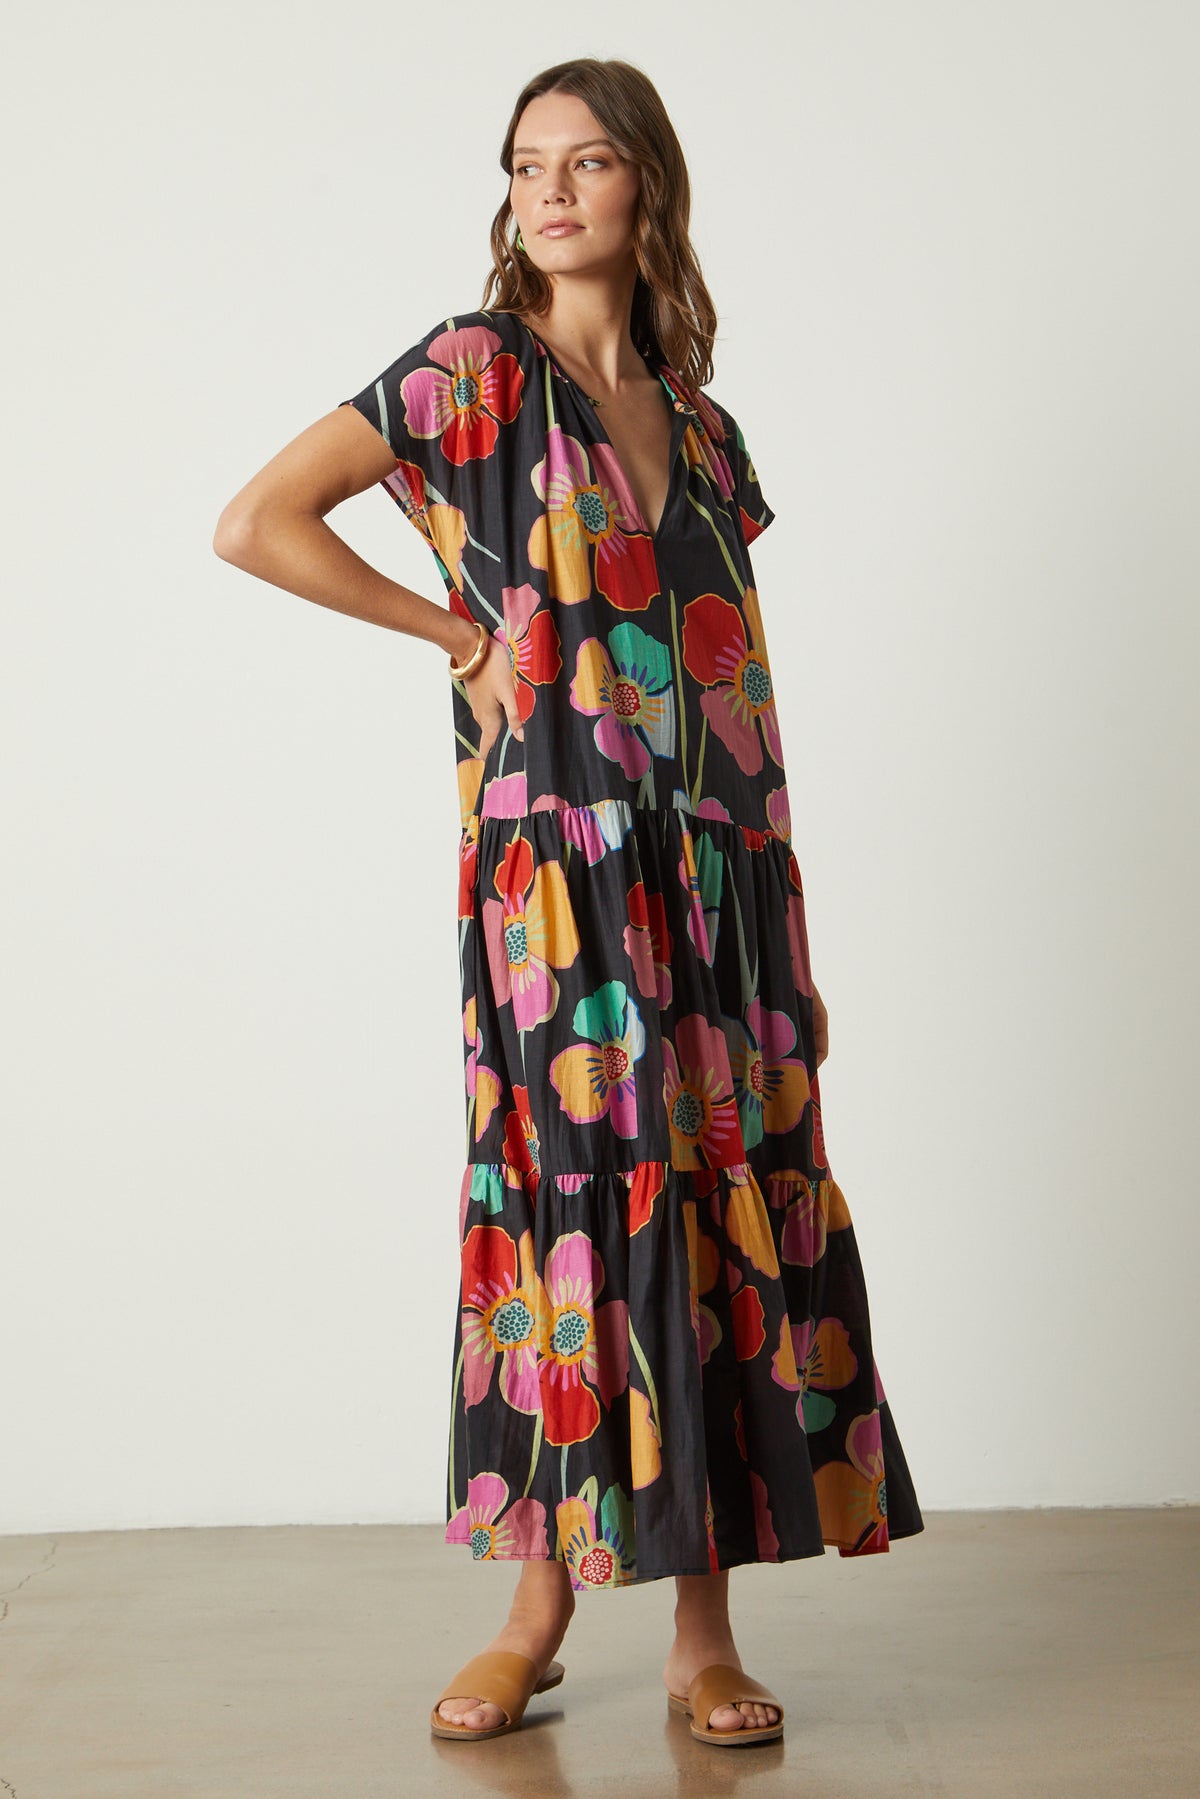 Savannah Maxi Dress in bold floral print on black background full length front untied-26233476382913